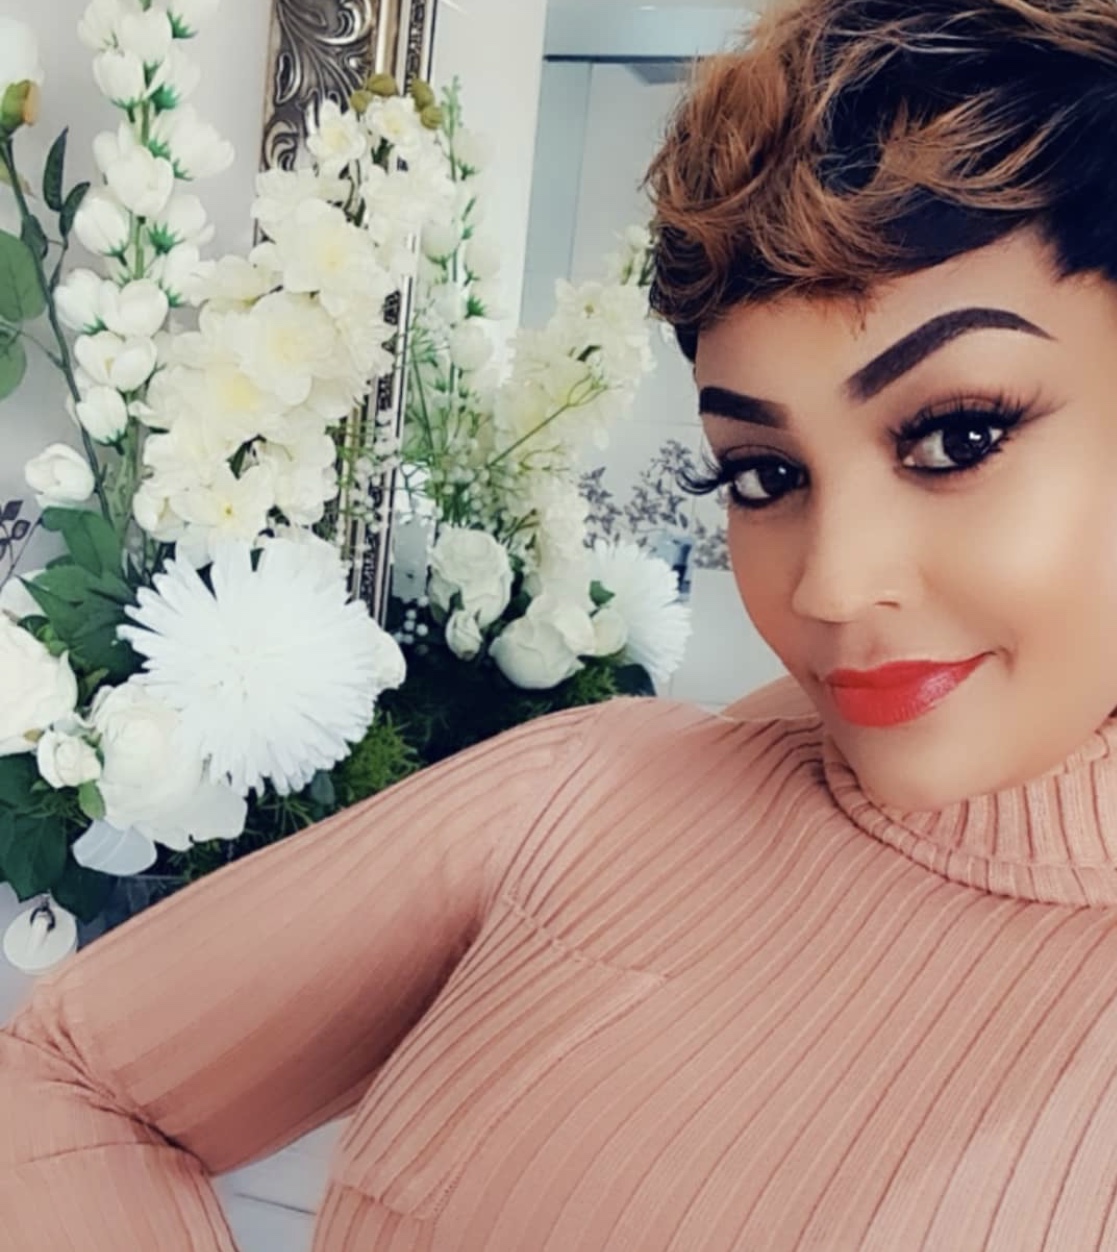 Zari Hassan leaves tongues wagging after doing this for her new man!